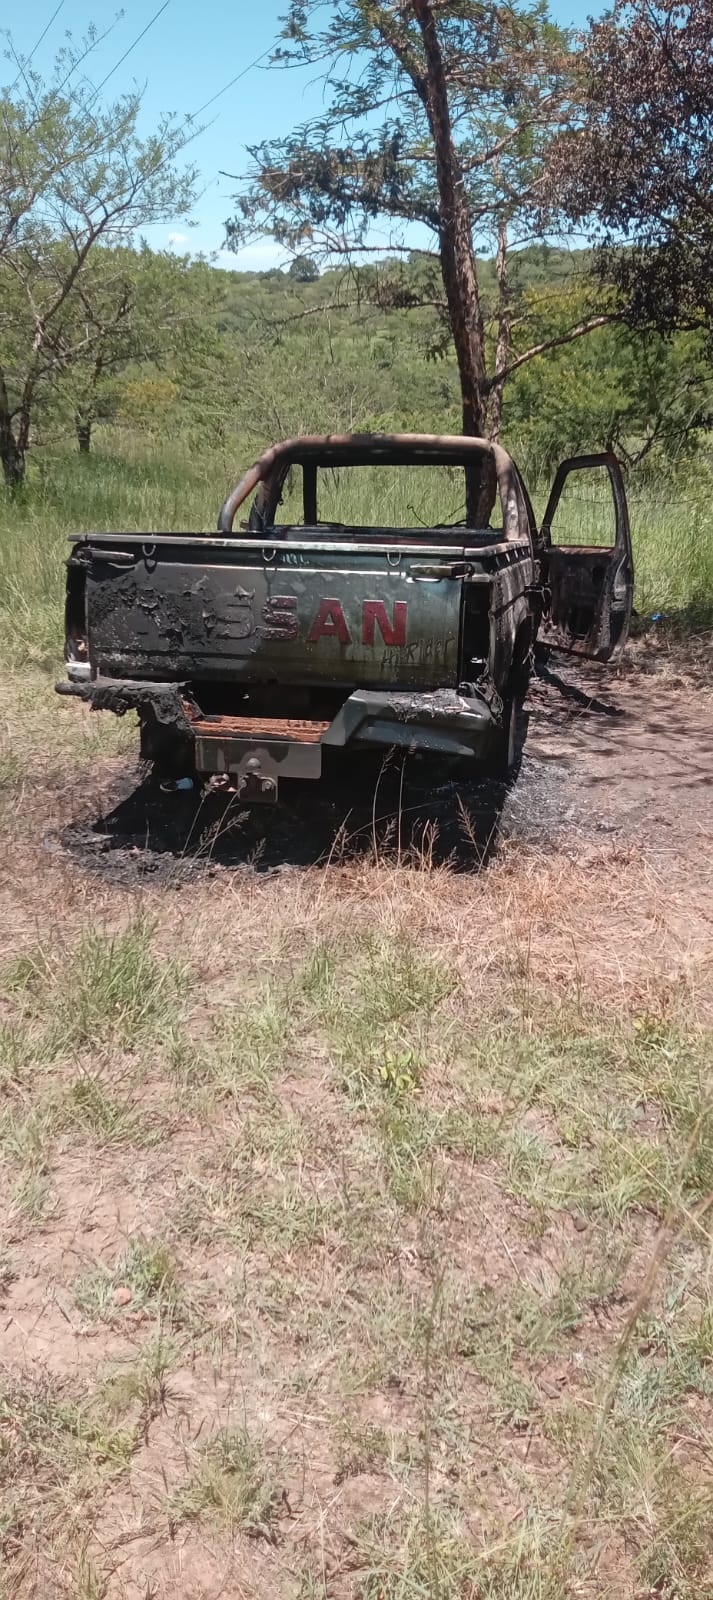 The burnt Nissan bakkie in which the suspected cow thieves were found.